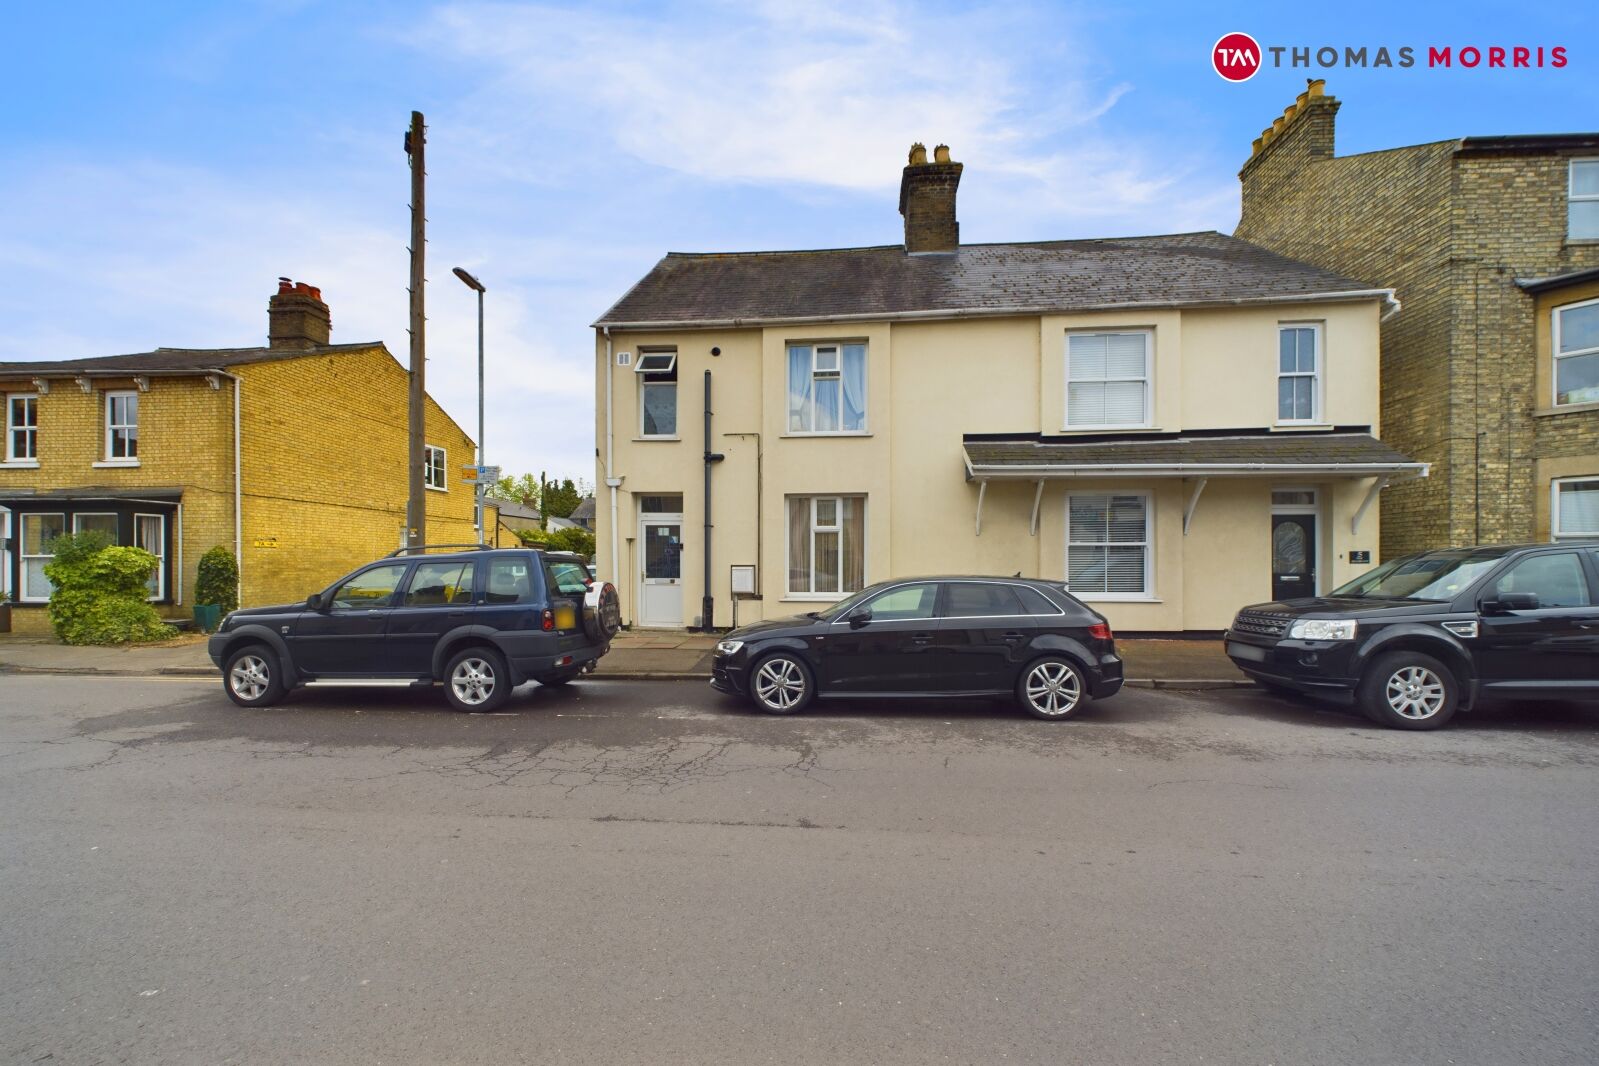 3 bedroom semi detached house for sale The Quadrant, St. Ives, PE27, main image